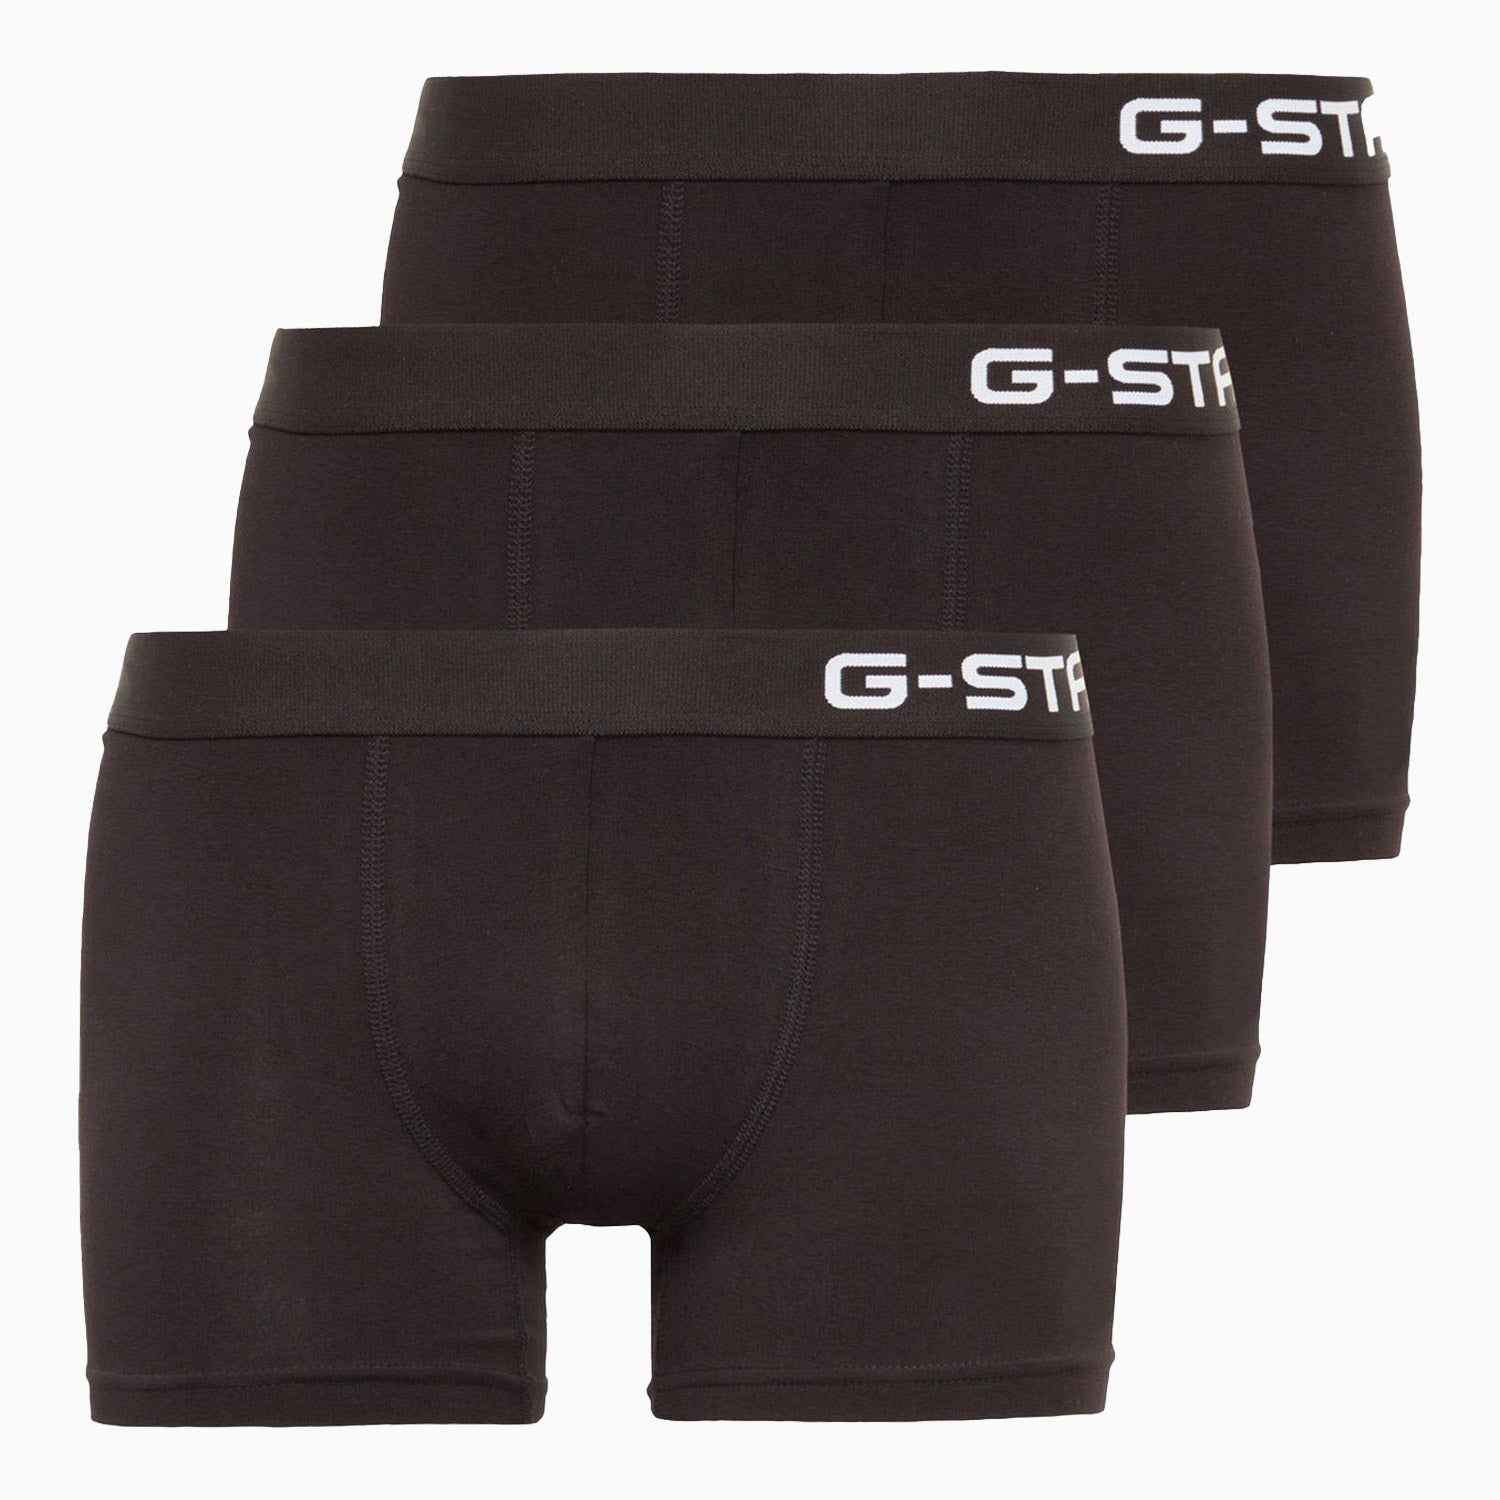 g-star-raw-mens-classic-trunk-3-pack-boxer-d03359-2058-4248